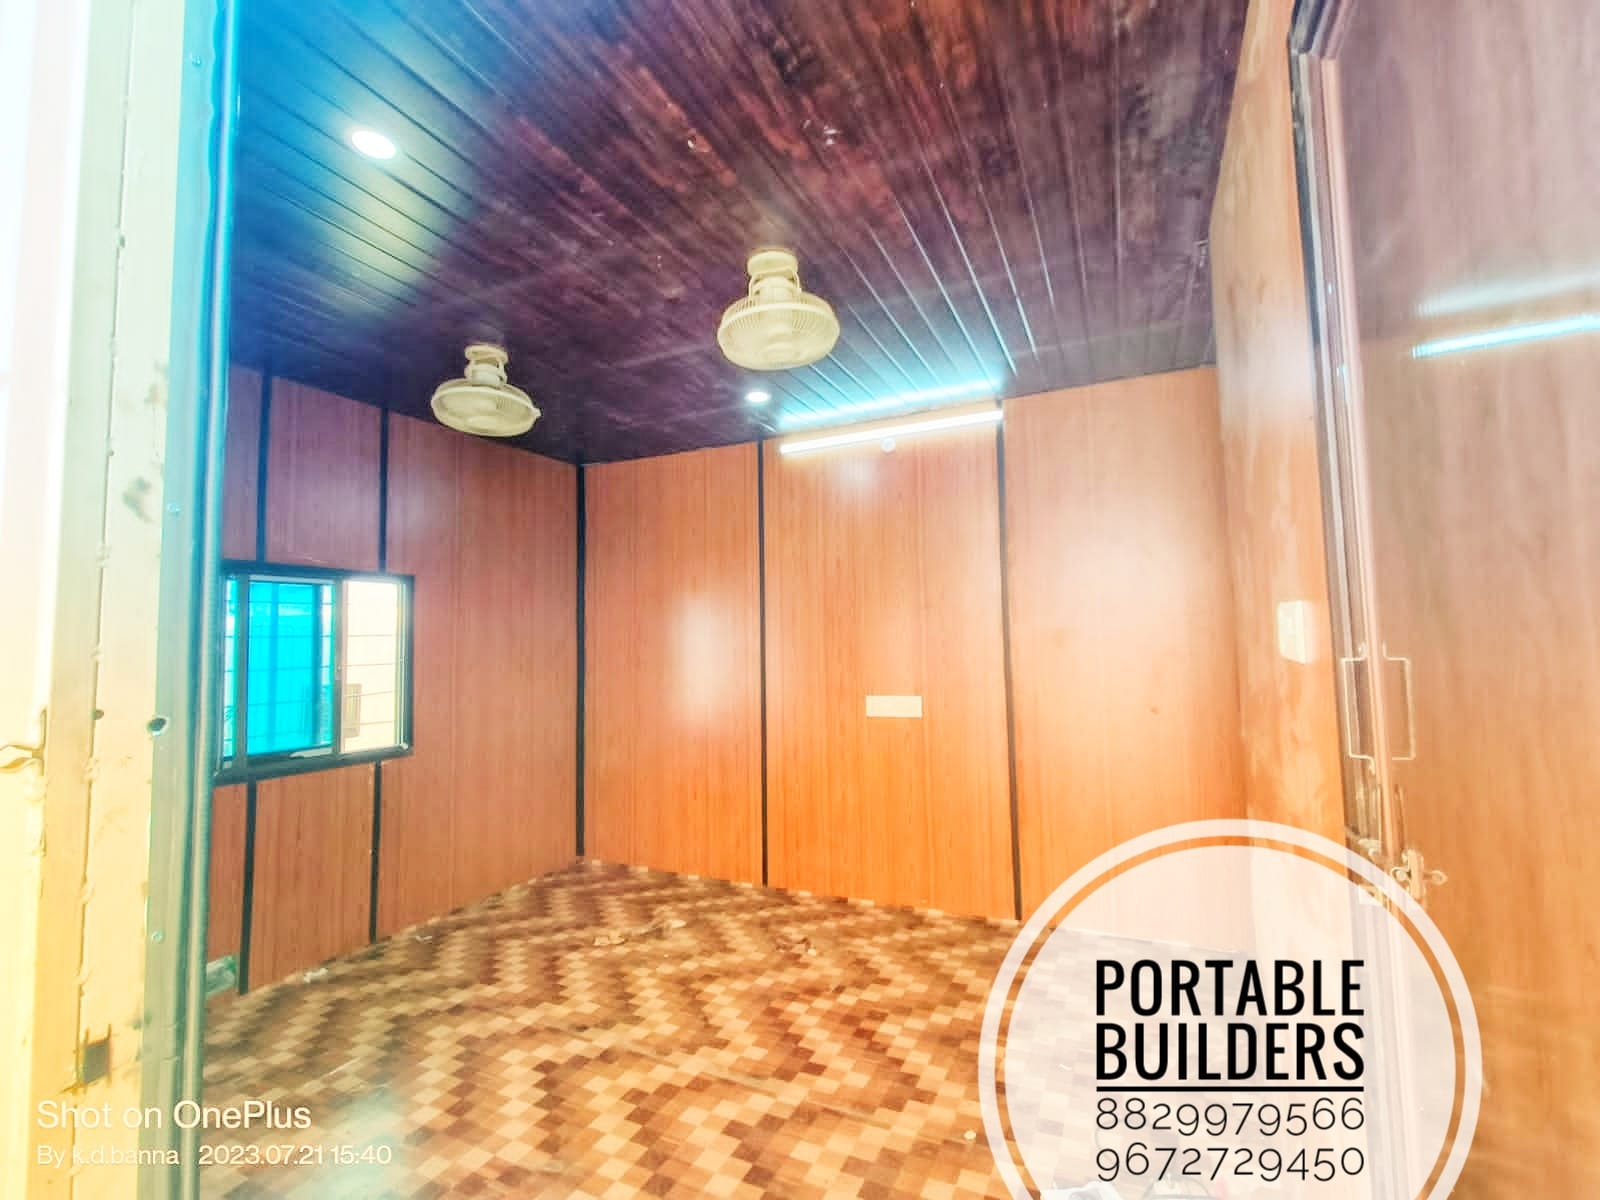 Interior Container office in jaipur portable builders